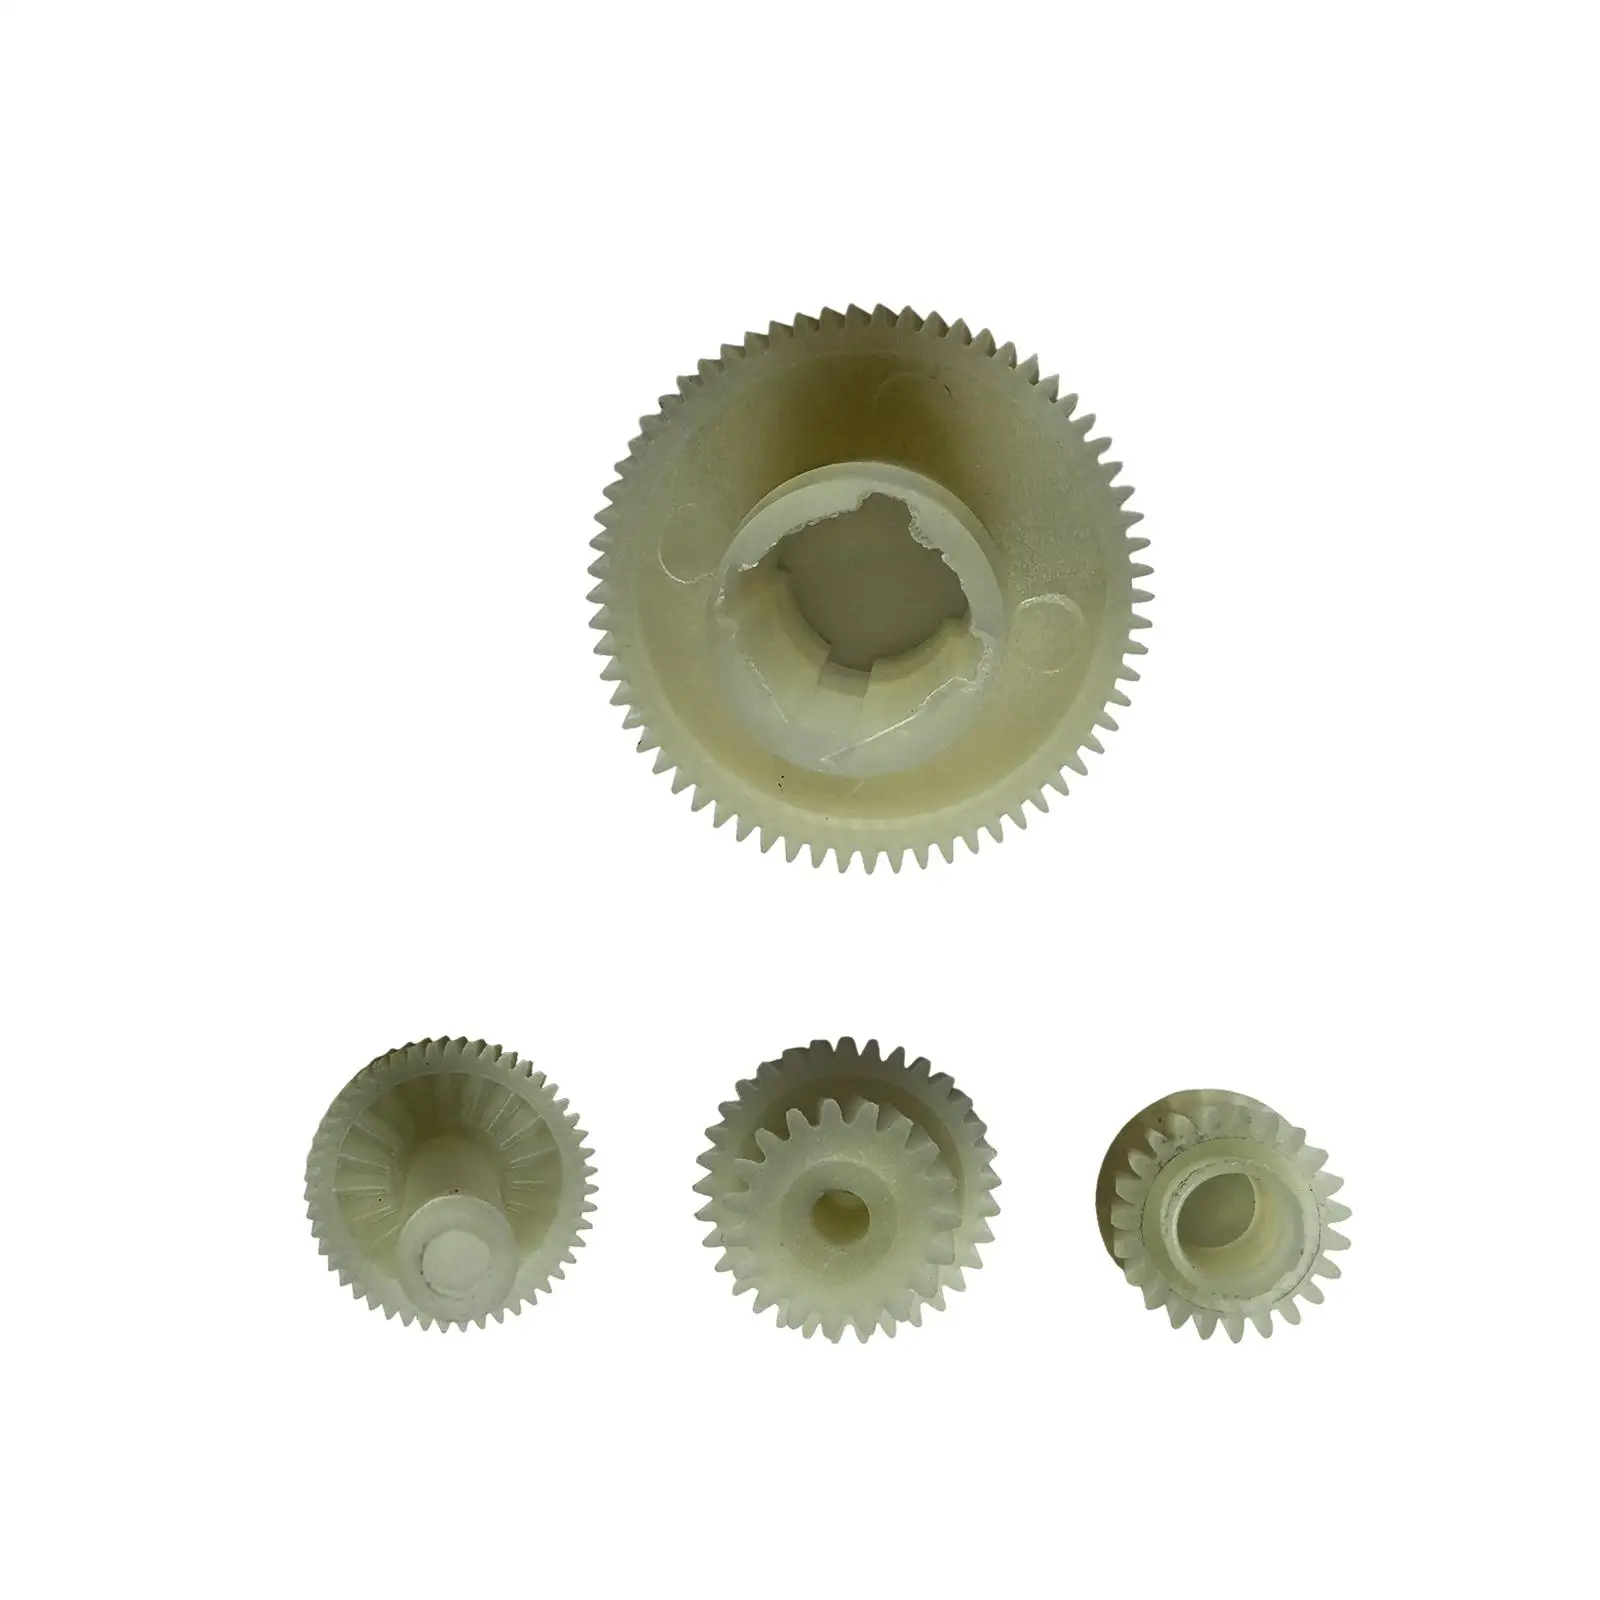 Parking Hand Brake Actuator Gear Repair Kit High Performance Directly Replace Durable for Land Rover Discovery 3 4